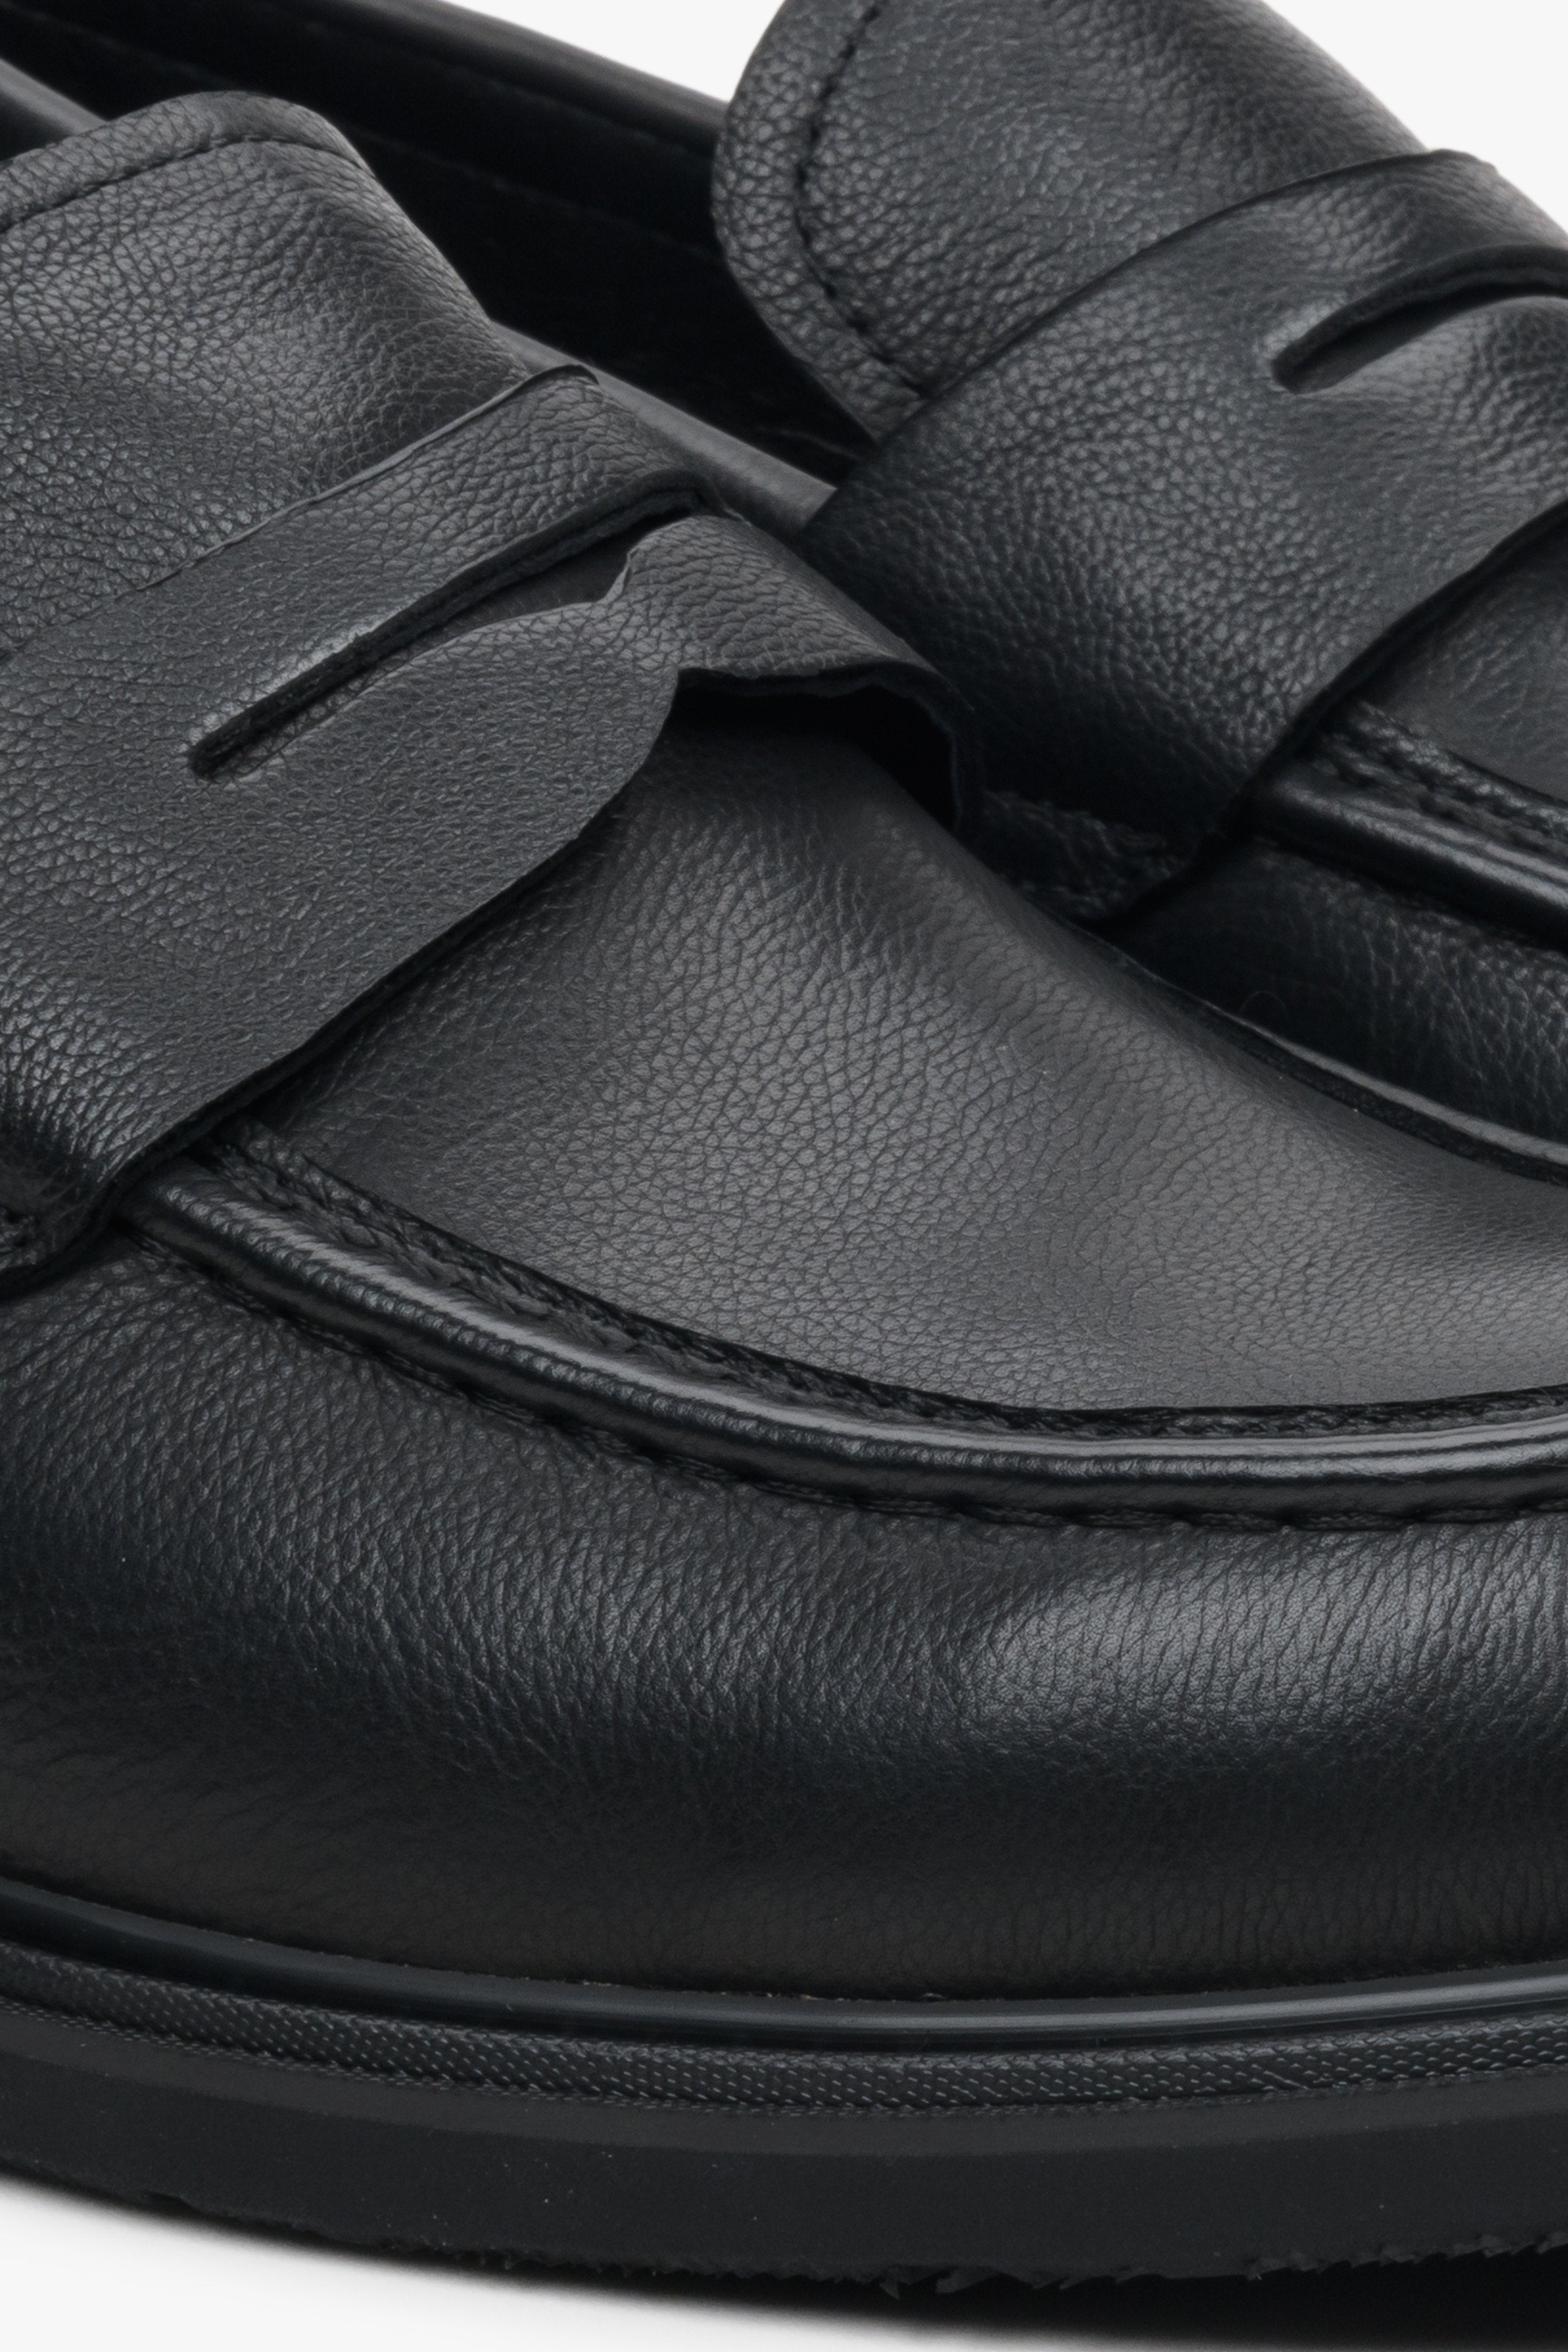 Men's black leather Estro loafers - close-up on the stitching pattern.